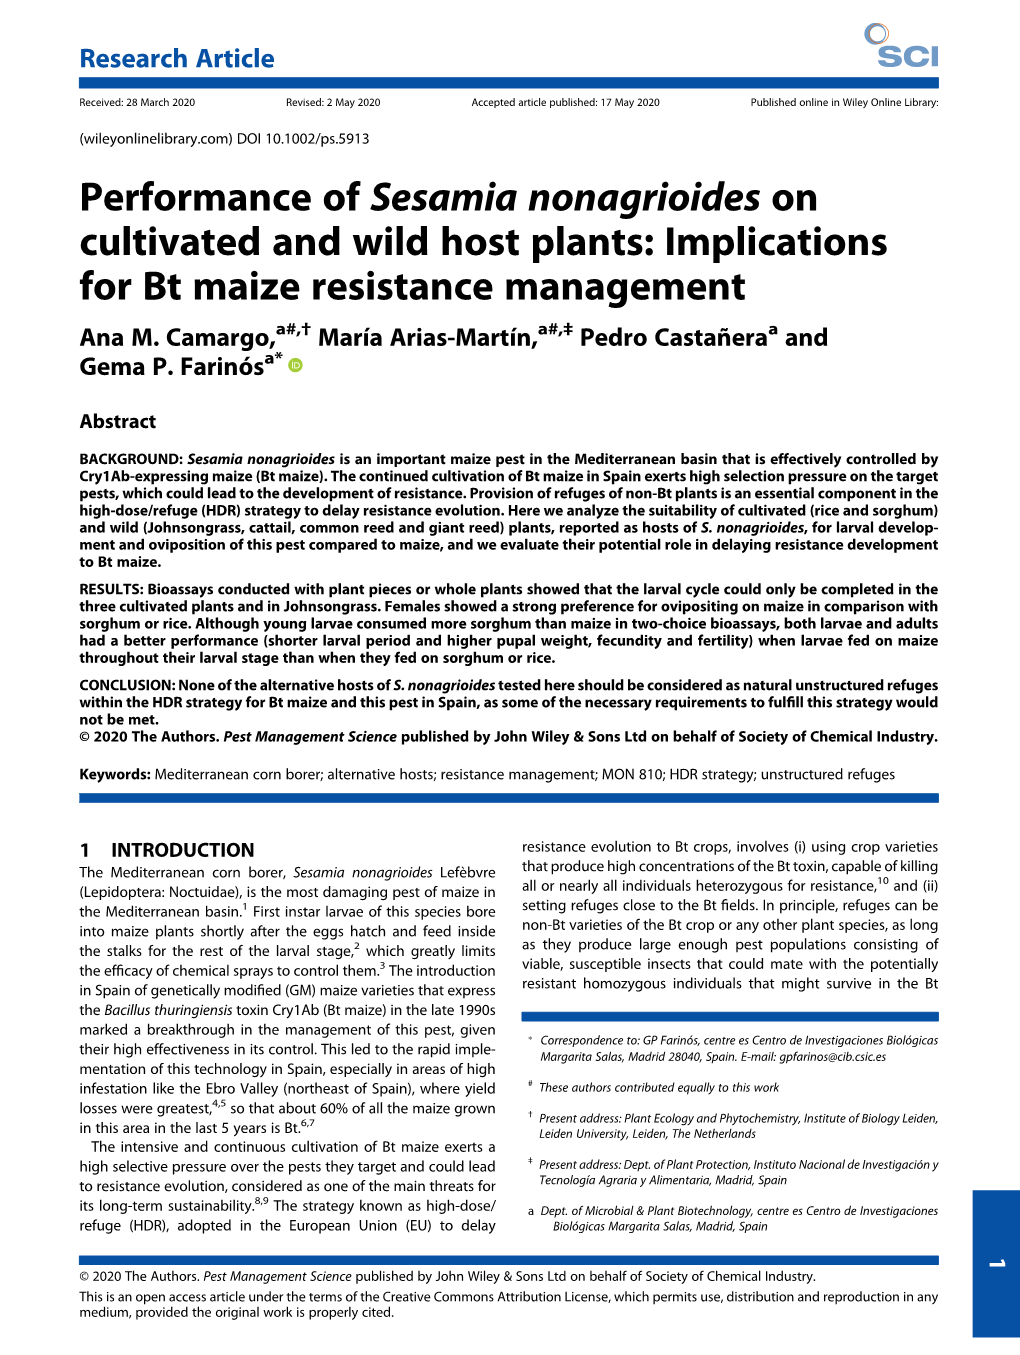 Performance of Sesamia Nonagrioides on Cultivated and Wild Host Plants: Implications for Bt Maize Resistance Management Ana M